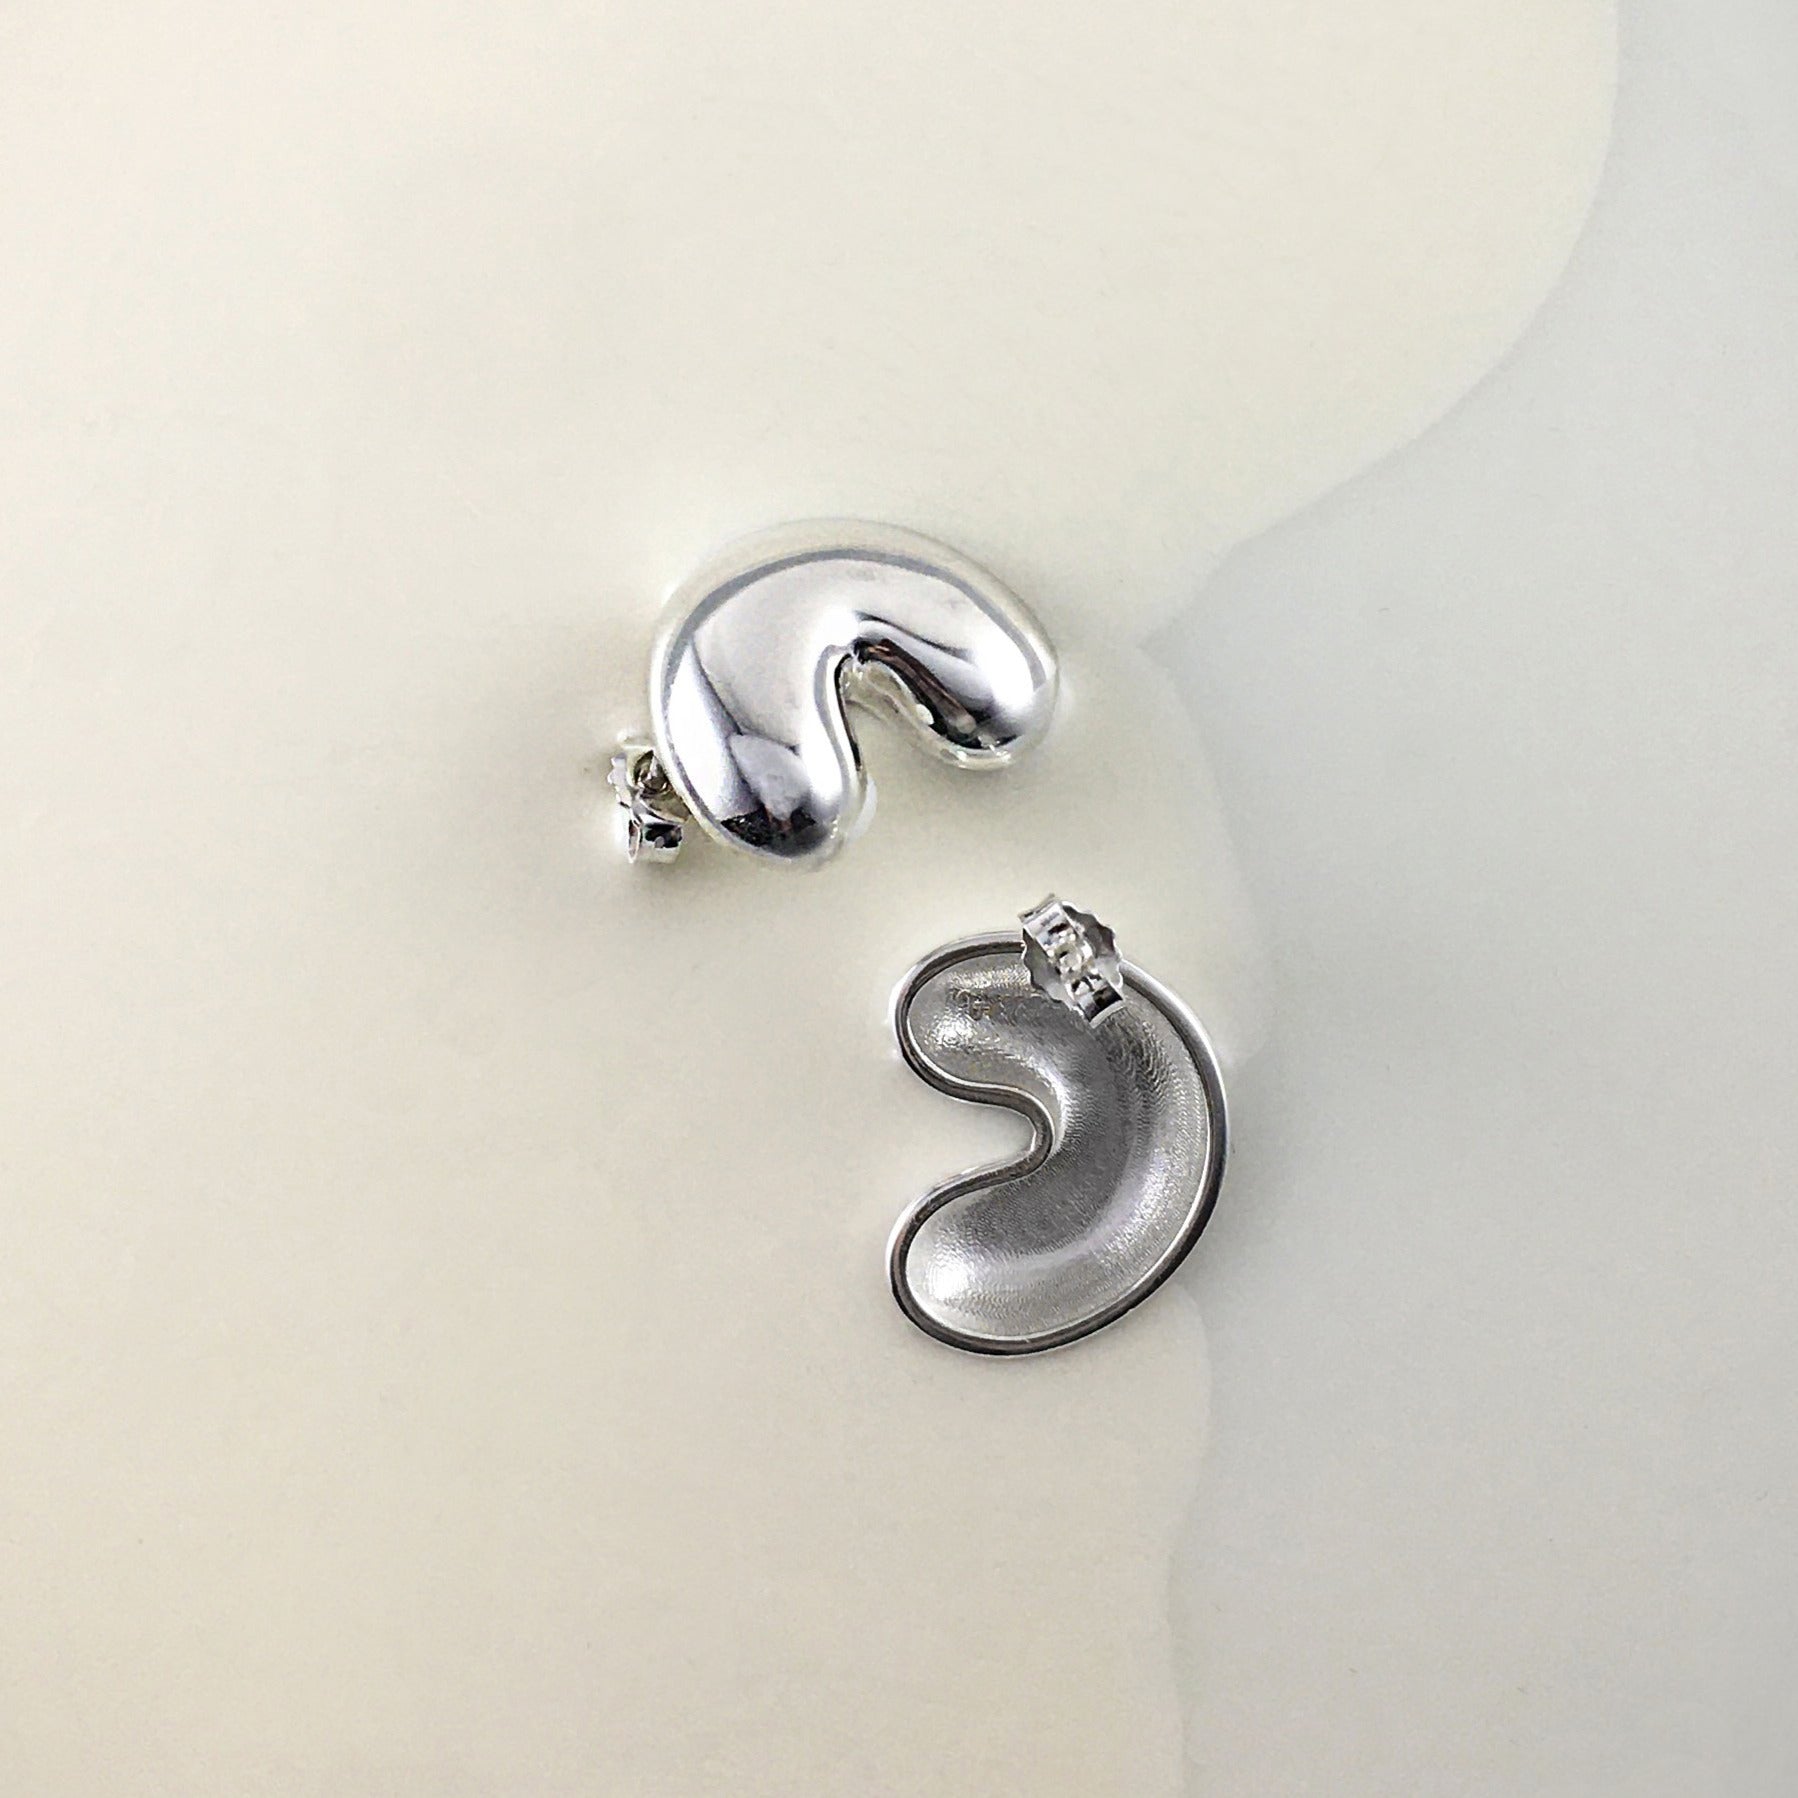 A pair of silver earrings, laying in milk